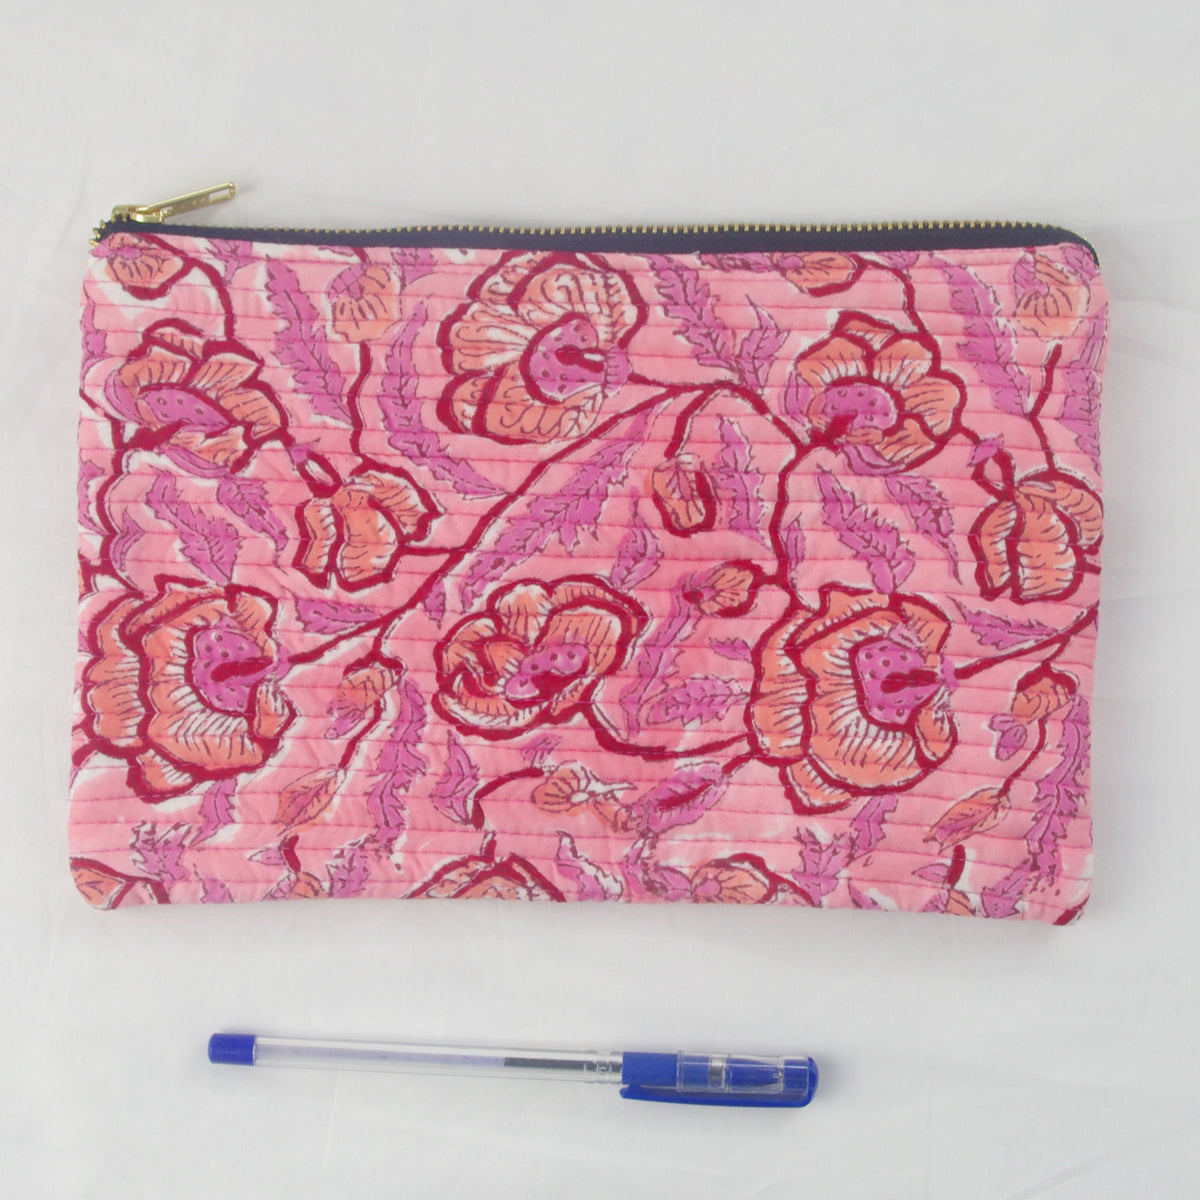 Block Print Makeup Pouch or Pencil Case- Pink Floral Jaal